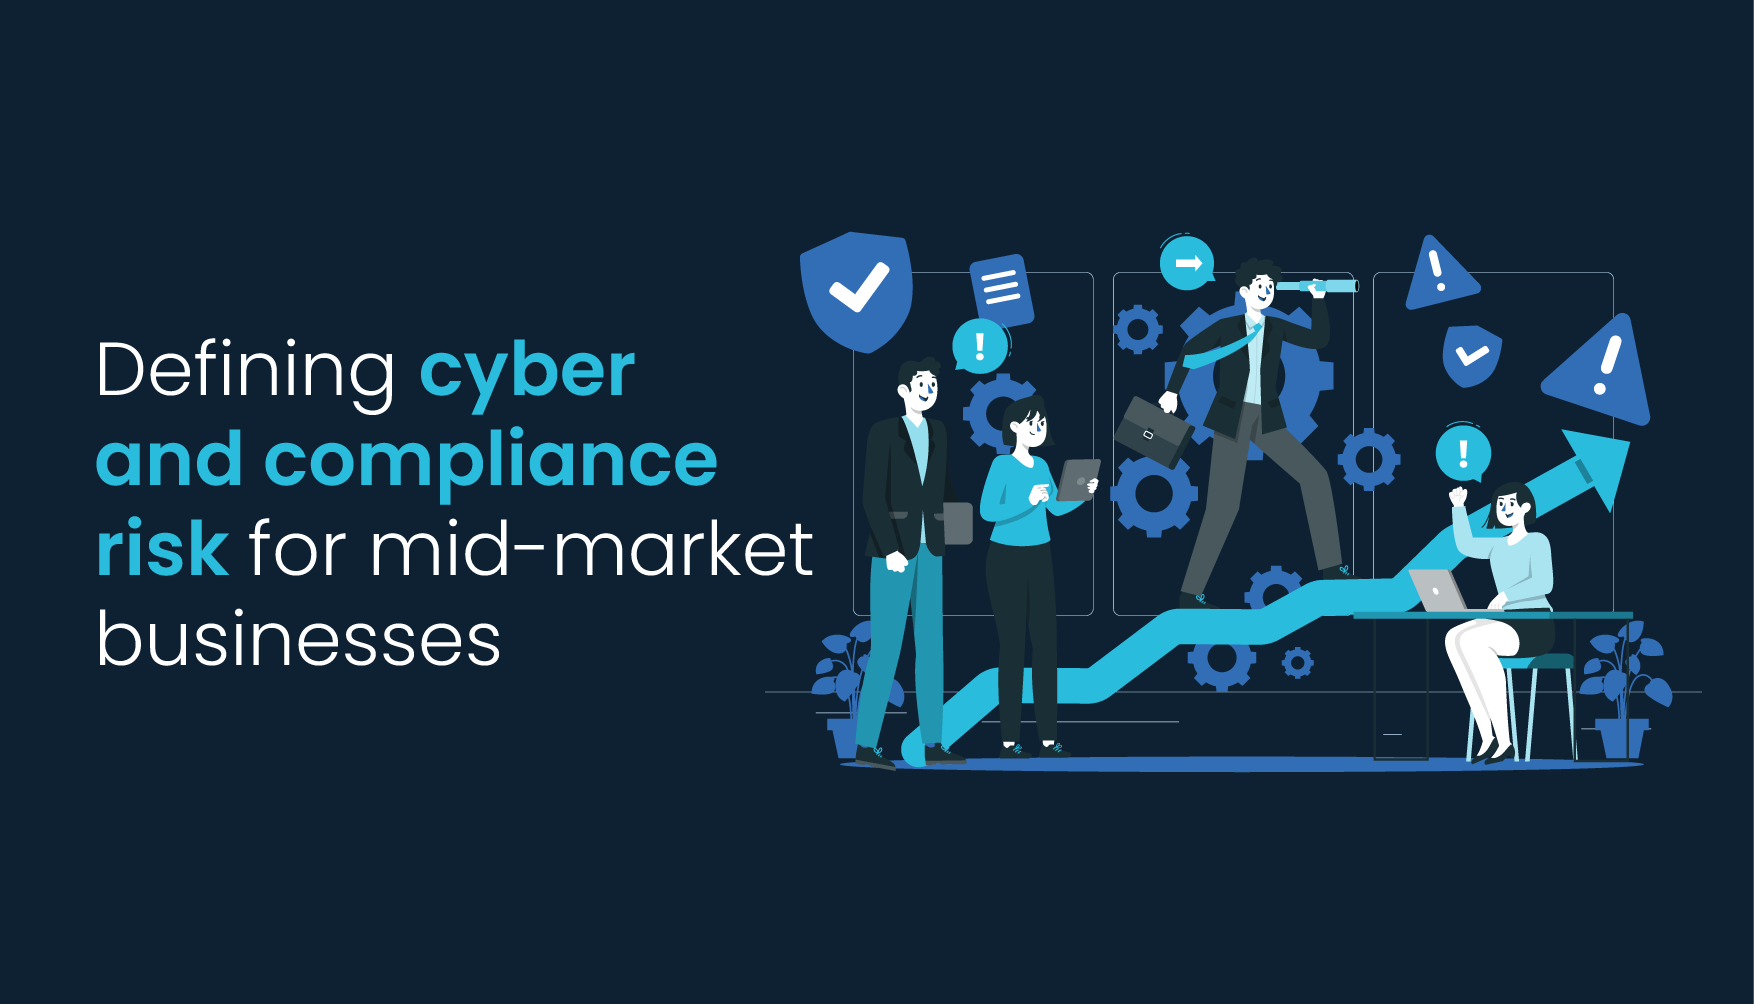 Defining cyber and compliance risk for mid-market businesses